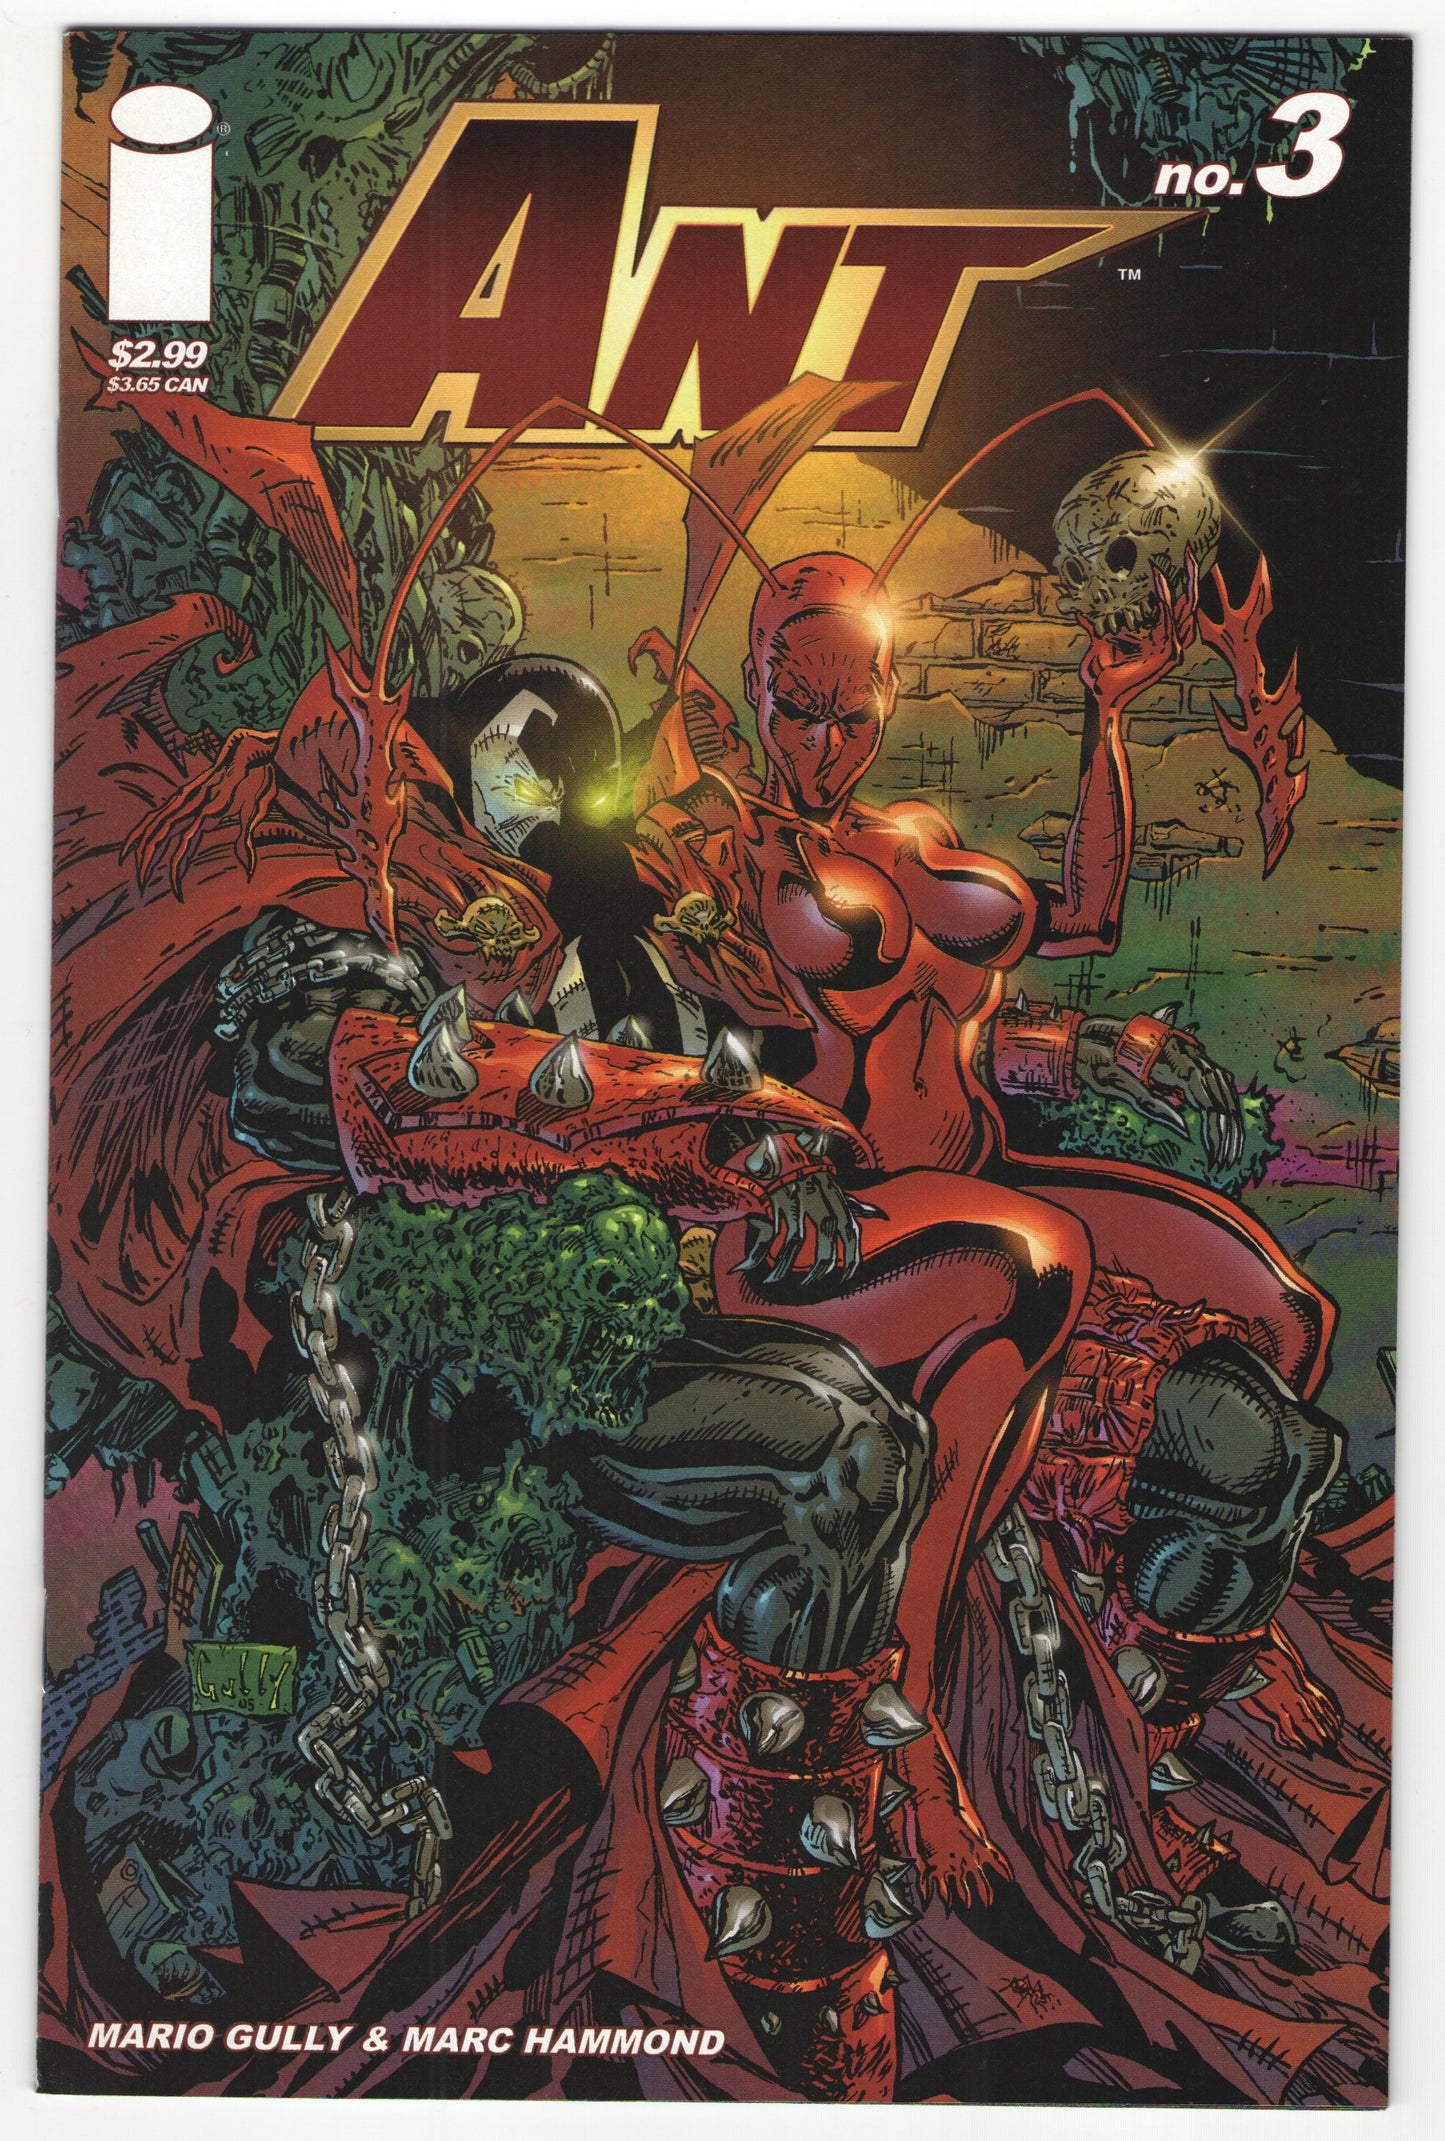 Ant (2005) Issues 1-4